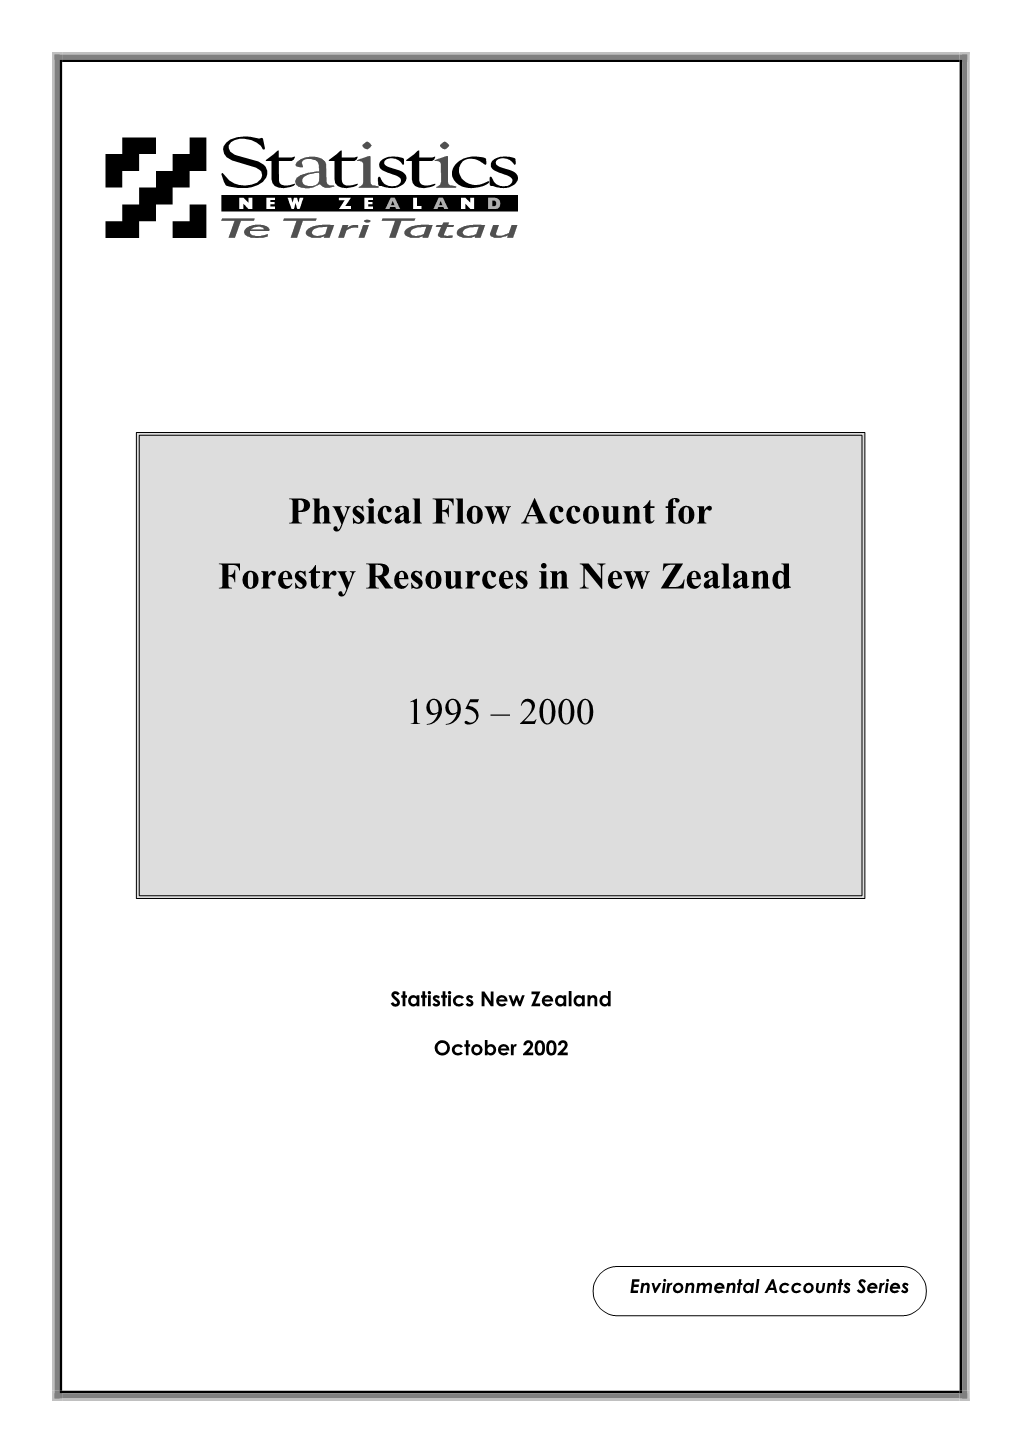 Physical Flow Account for Forestry Resources in New Zealand